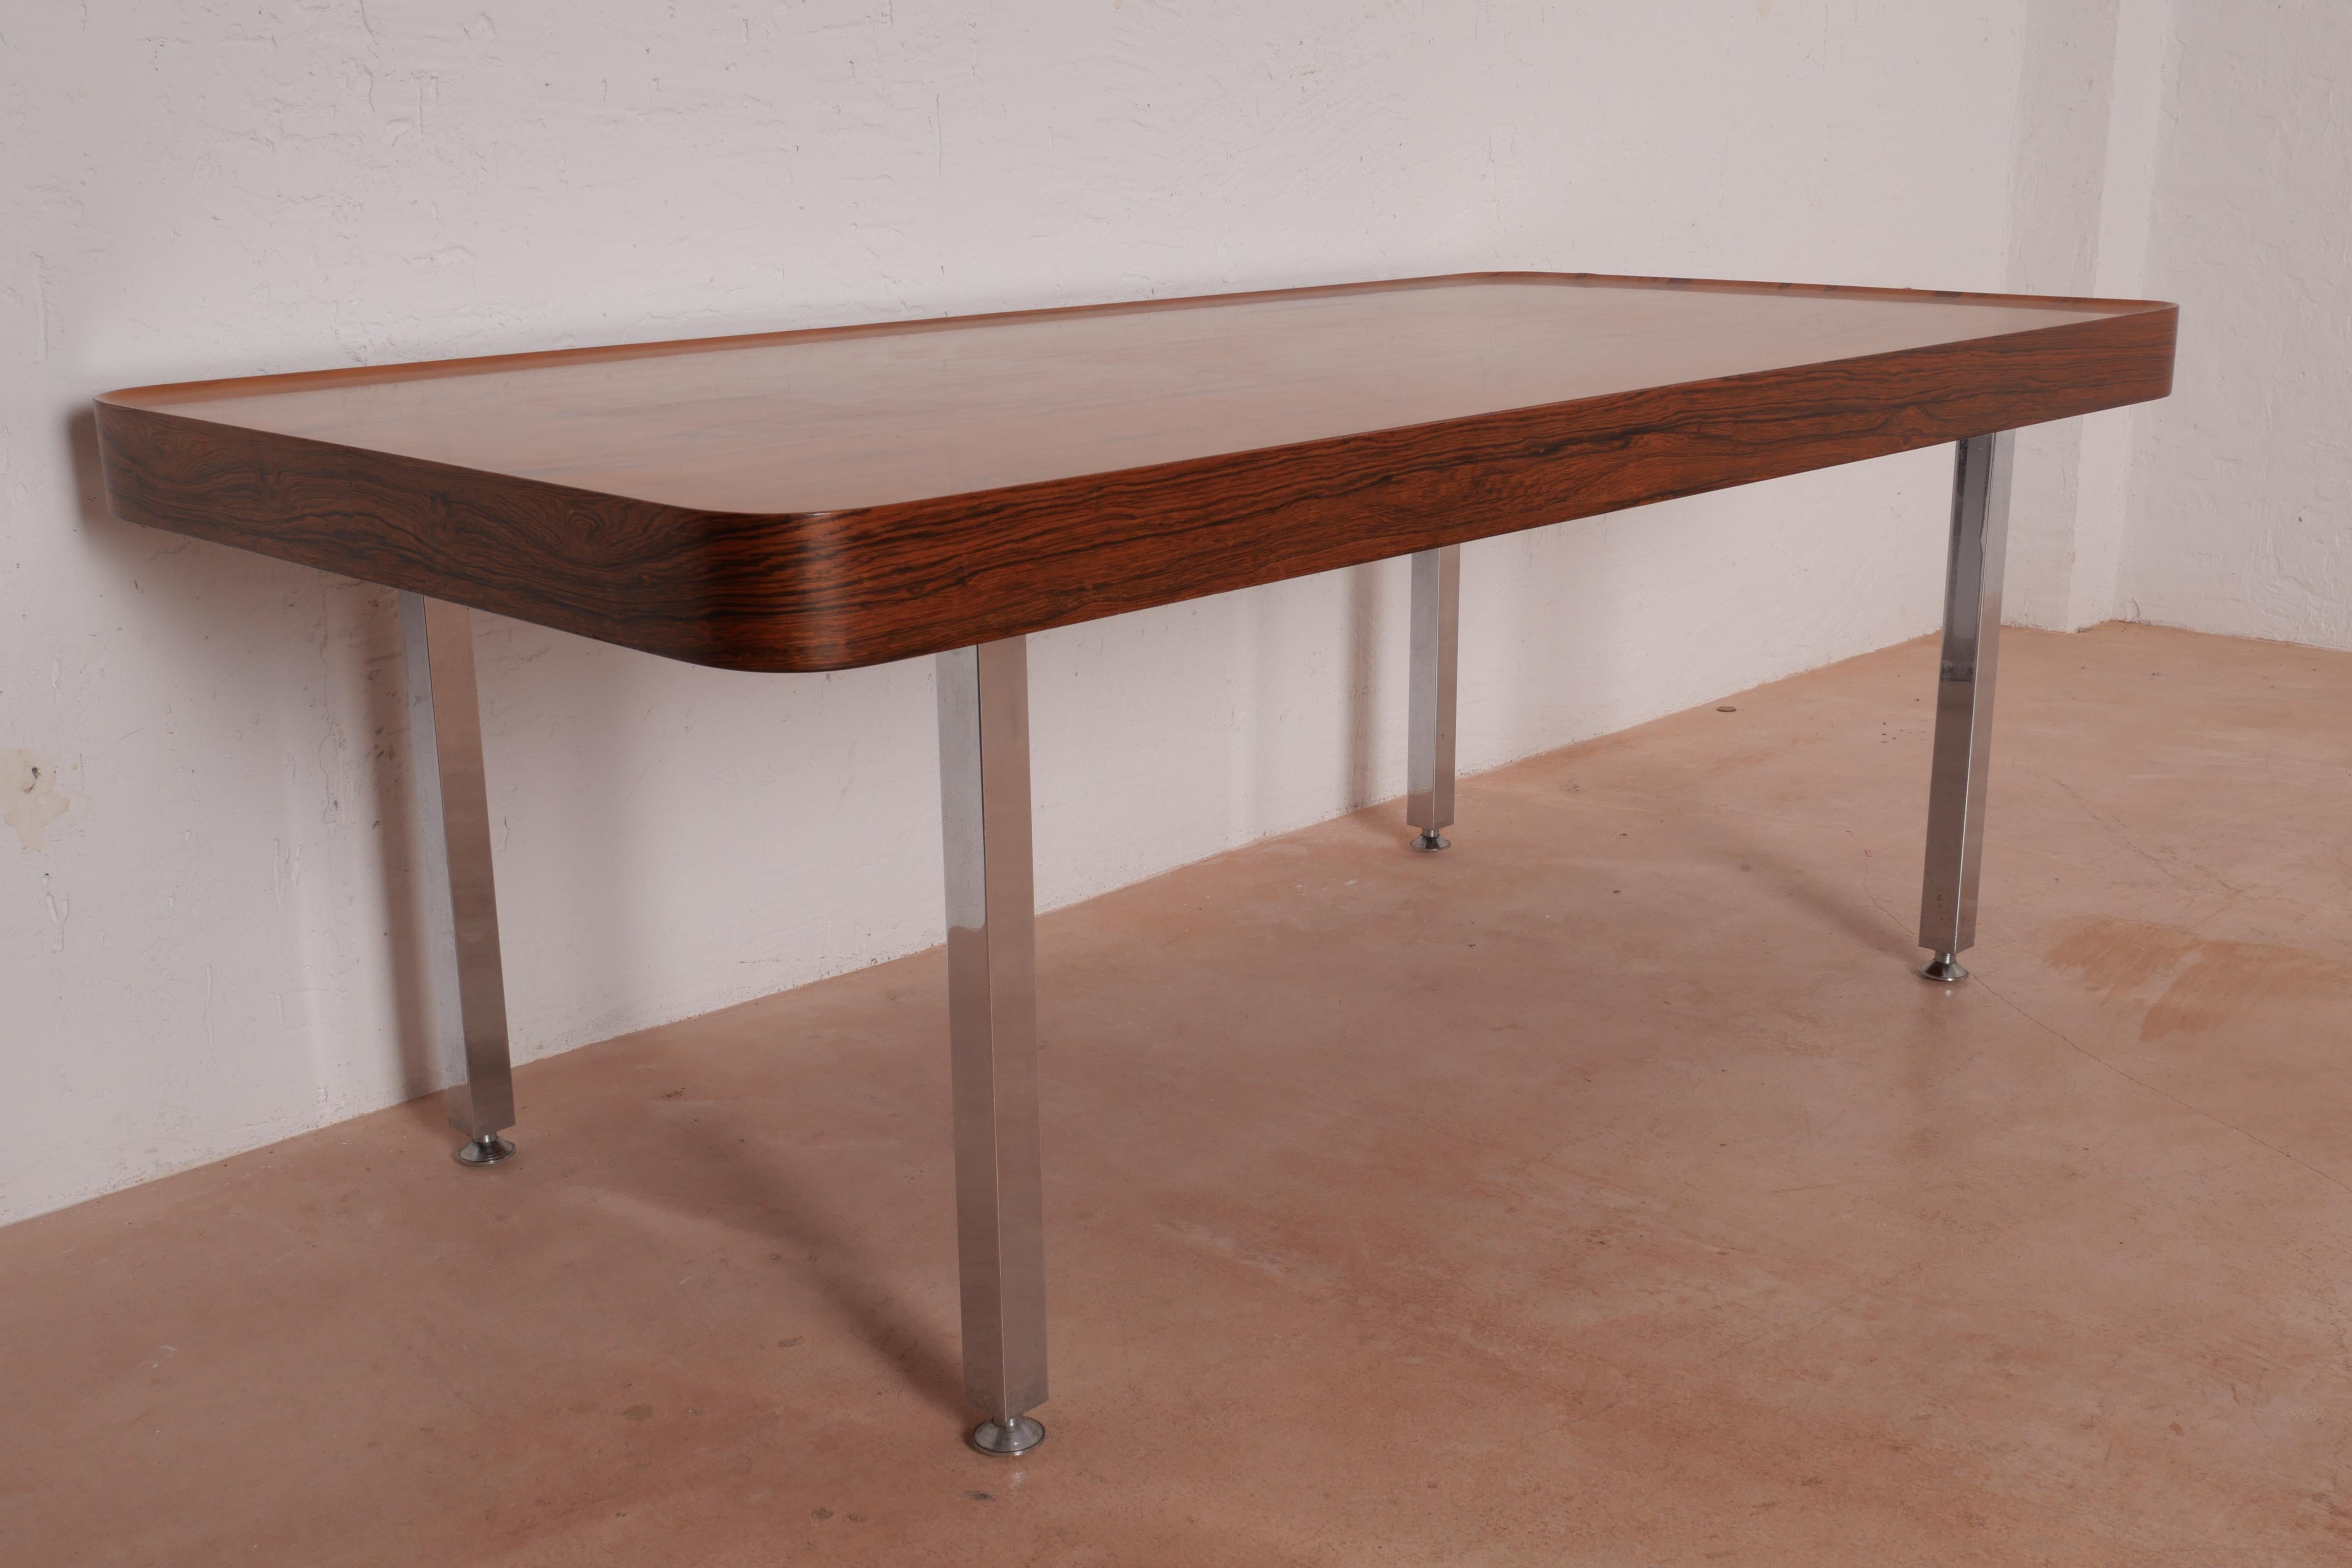 Isamu Kenmochi Coffee Table Chromed Metal and Japanese Walnut, 1969 In Good Condition For Sale In Santa Gertrudis, Baleares